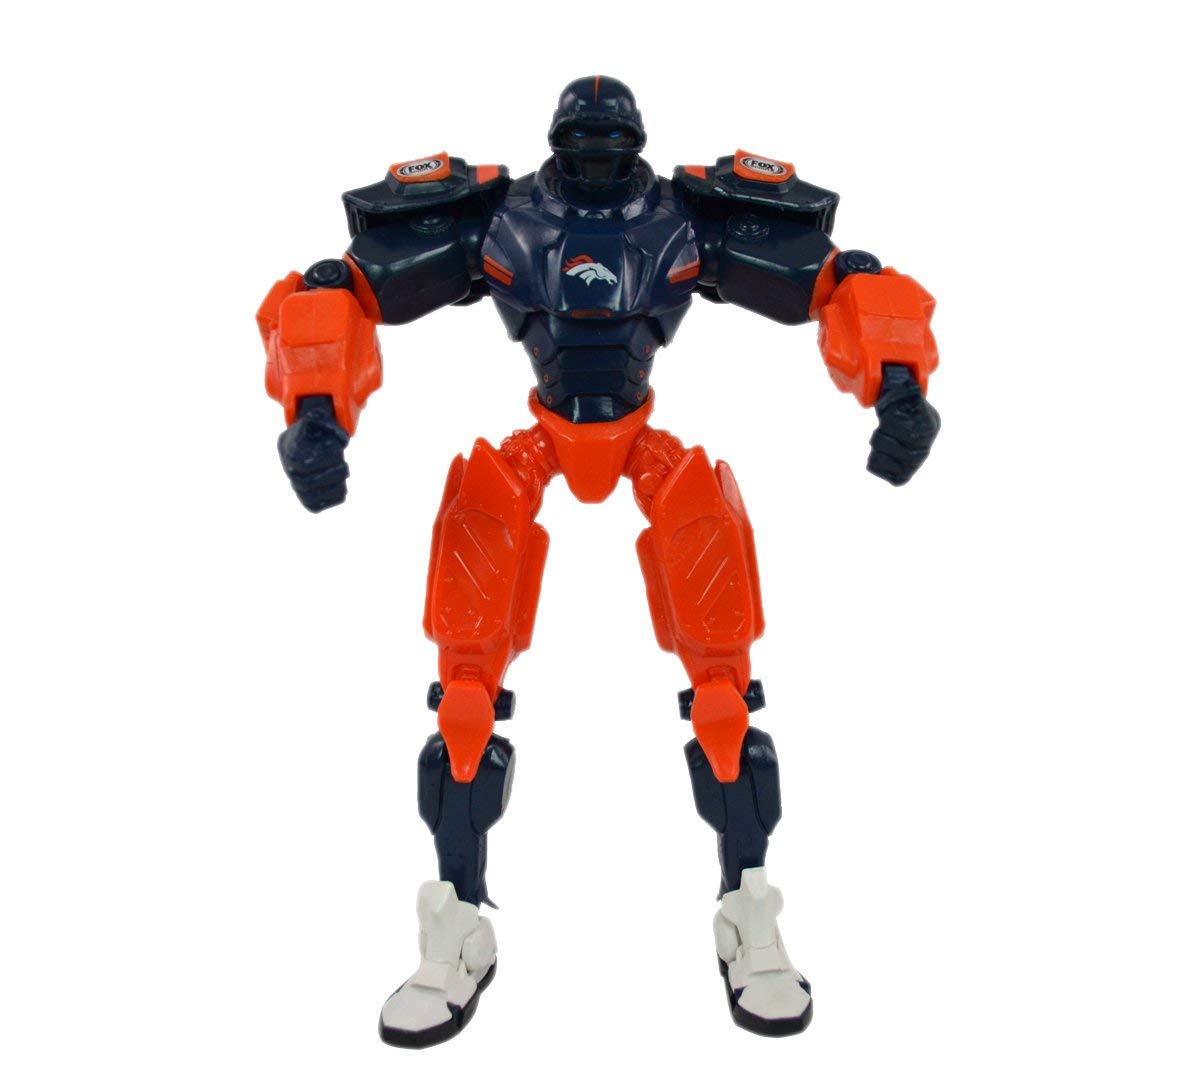 NFL Shop Authentic Fox Sports Cleatus Robot. This 10" Cleatus Football Robot will definitely be a crowd pleaser for any NFL Fan. A hit for Sports Fan from 4 to 94